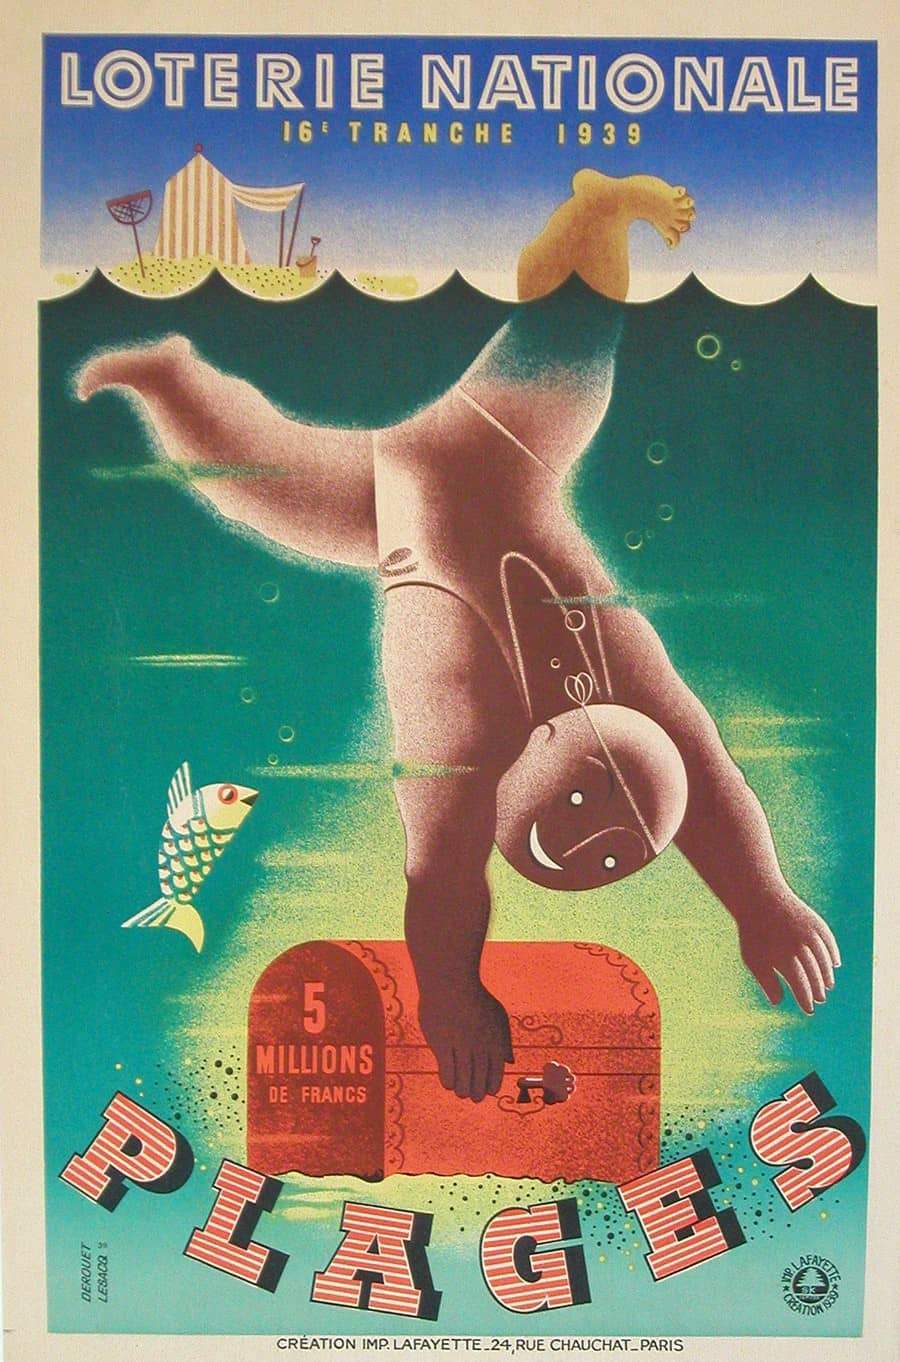 Original Vintage Loterie Nationale Plages Poster by Derouet Lesacq 1939 French Lottery